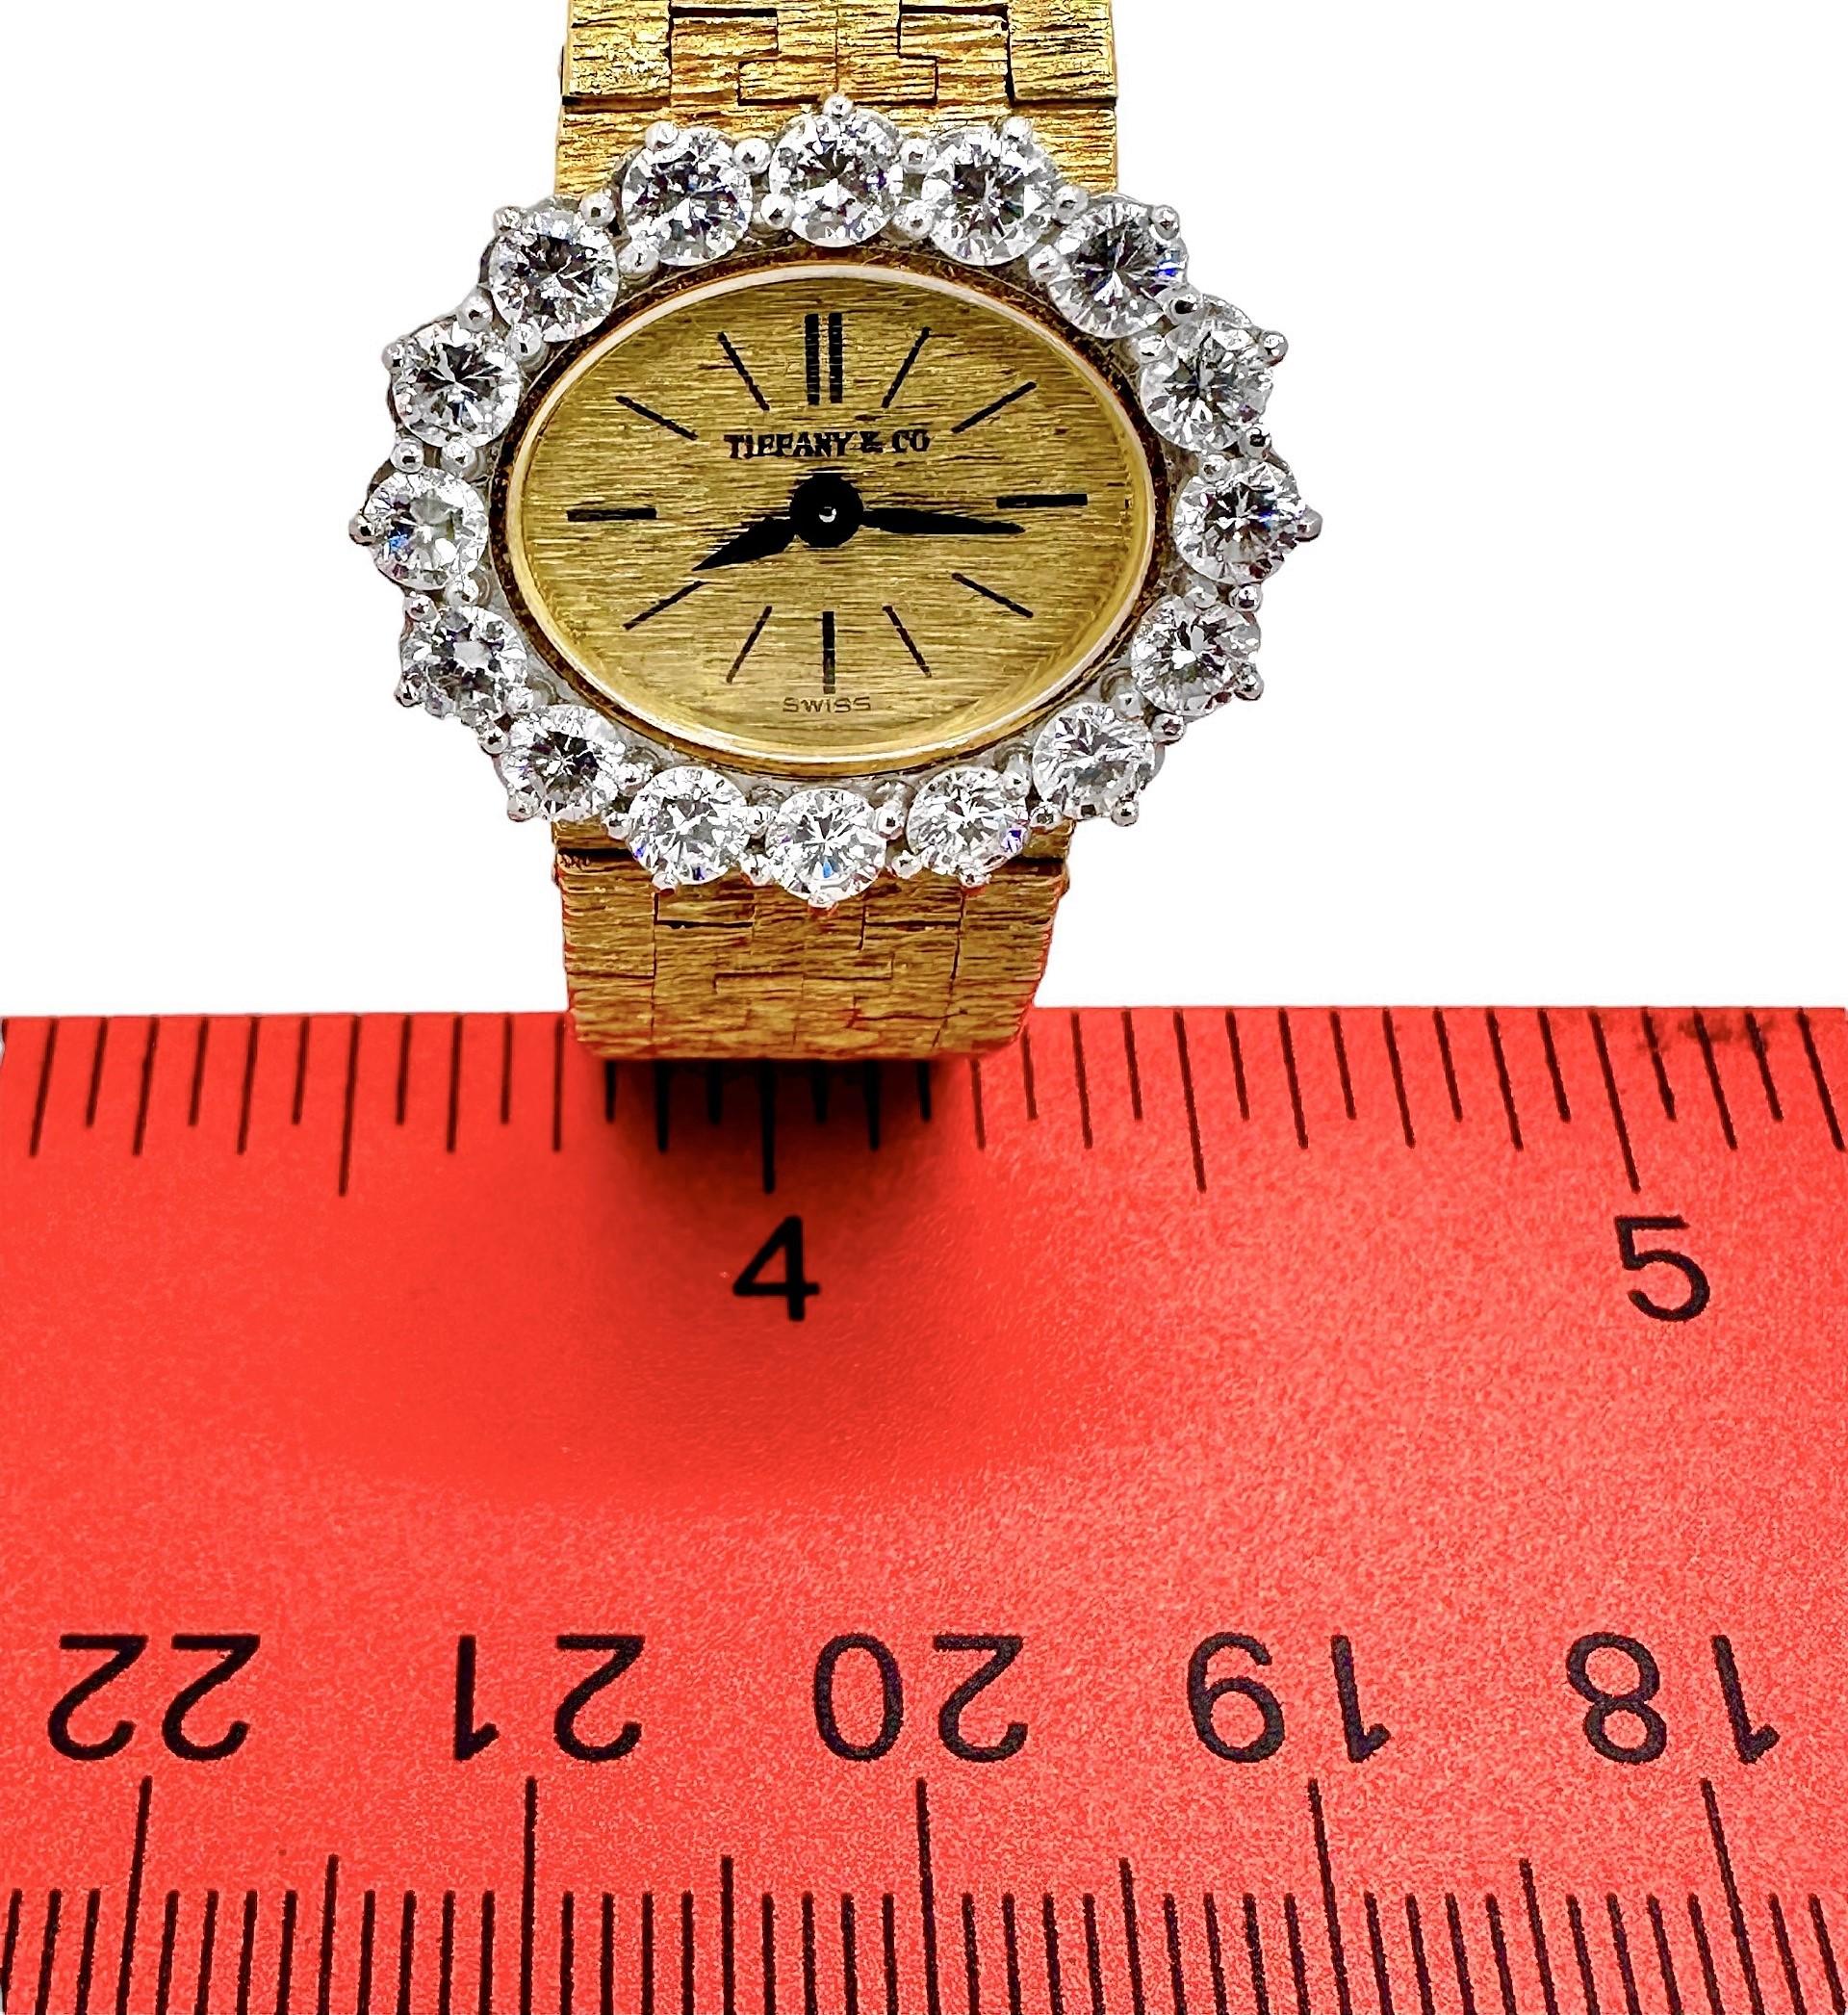 Women's Vintage Ladies 18k Gold Tiffany & Co Wrist Watch with Diamond Bezel by Piaget For Sale